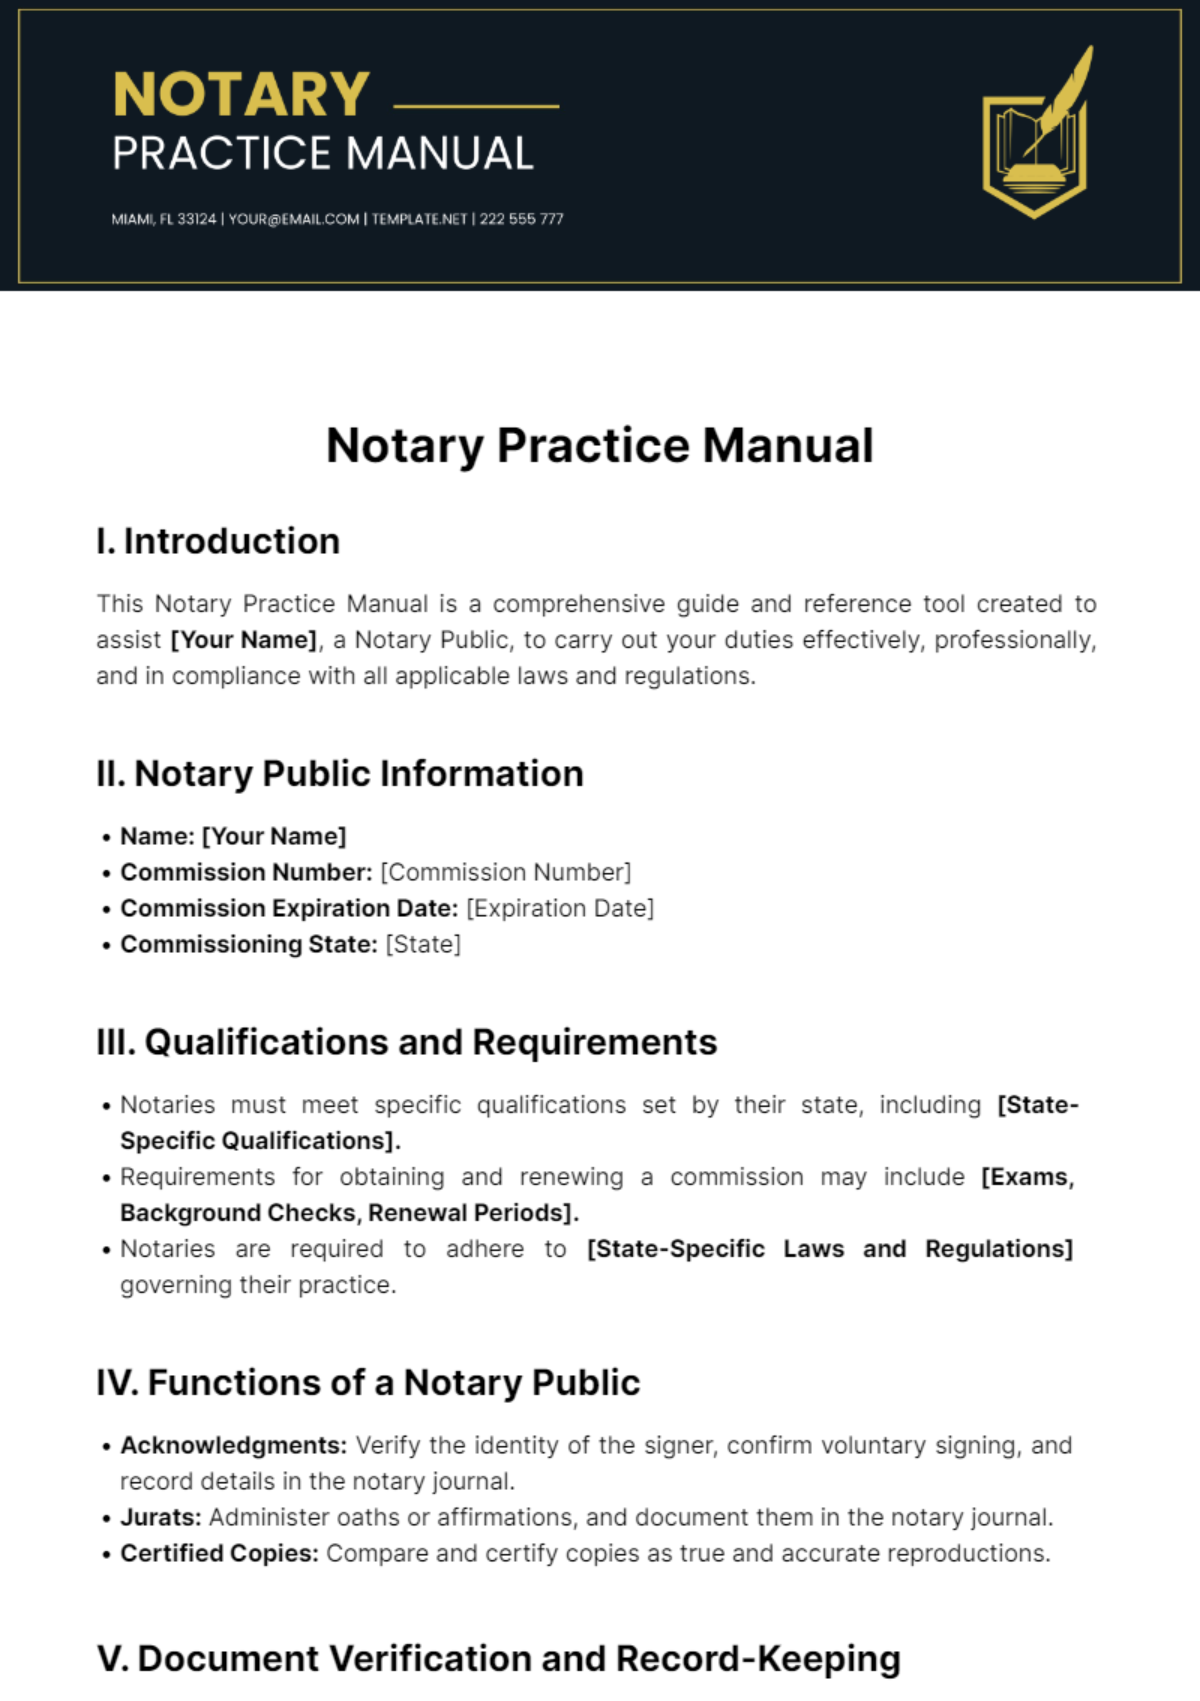 Notary Practice Manual Template